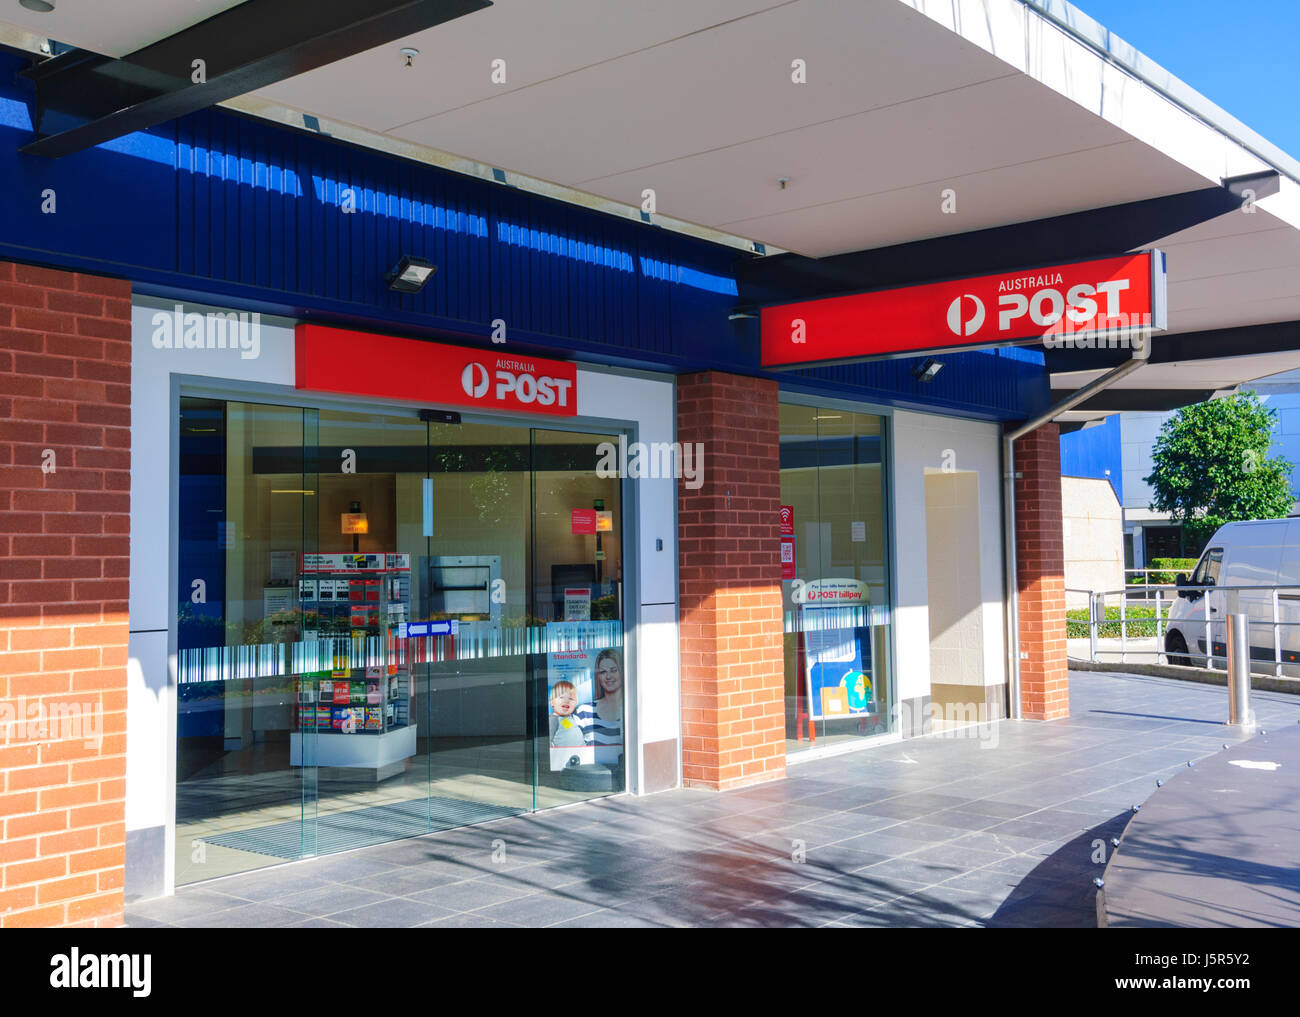 Australia Post Office at Shellharbour, New South Wales, NSW, Australia Stock Photo